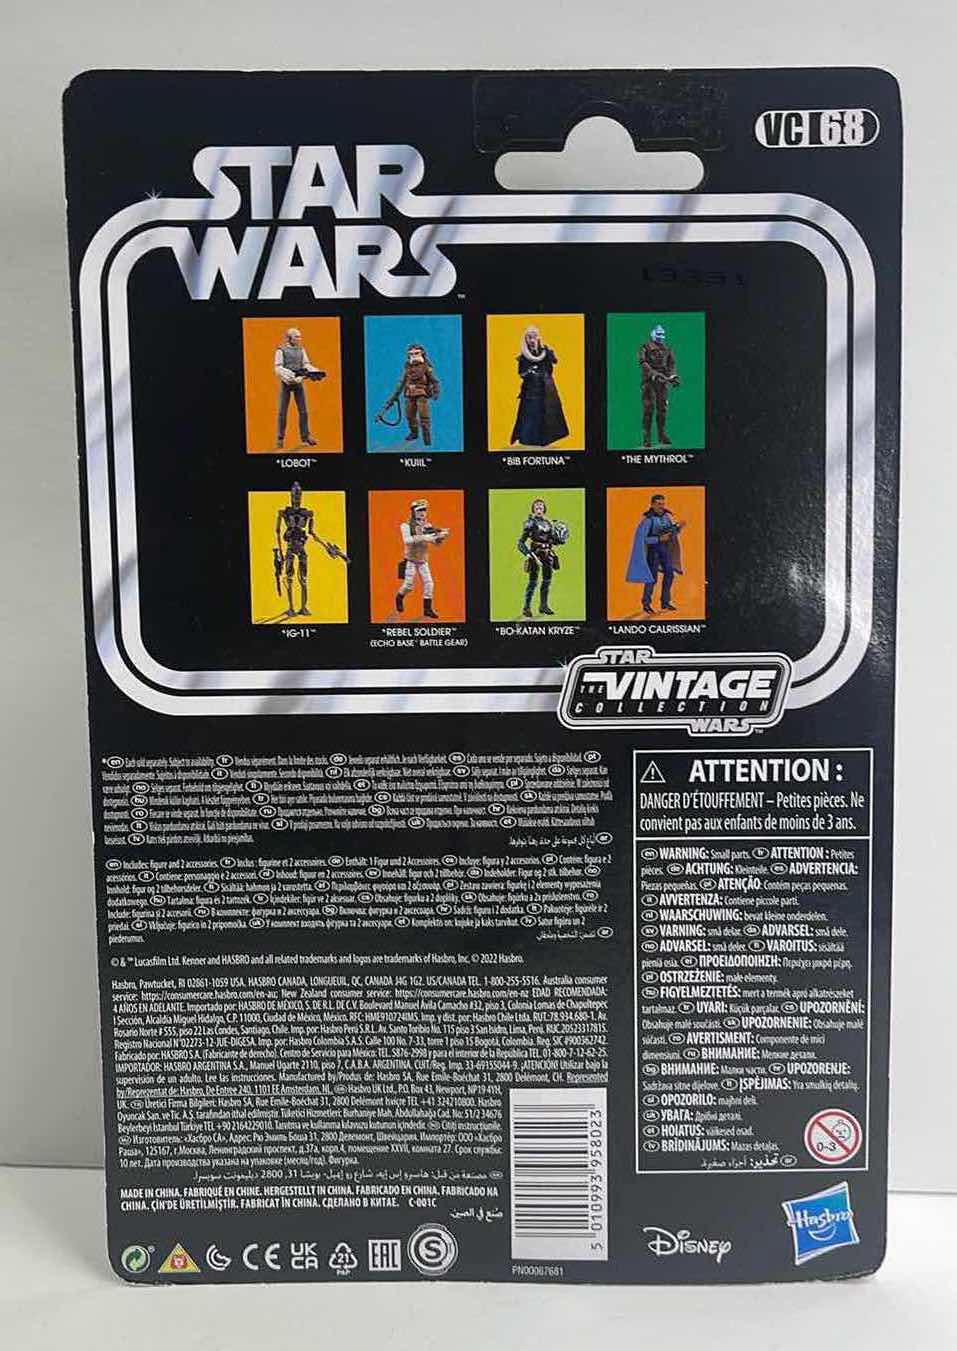 Photo 2 of NIB STAR WARS THE VINTAGE COLLECTION “REBEL SOLDIER ECHO BASE BATTLE GEAR” ACTION FIGURE – RETAIL PRICE $11.00